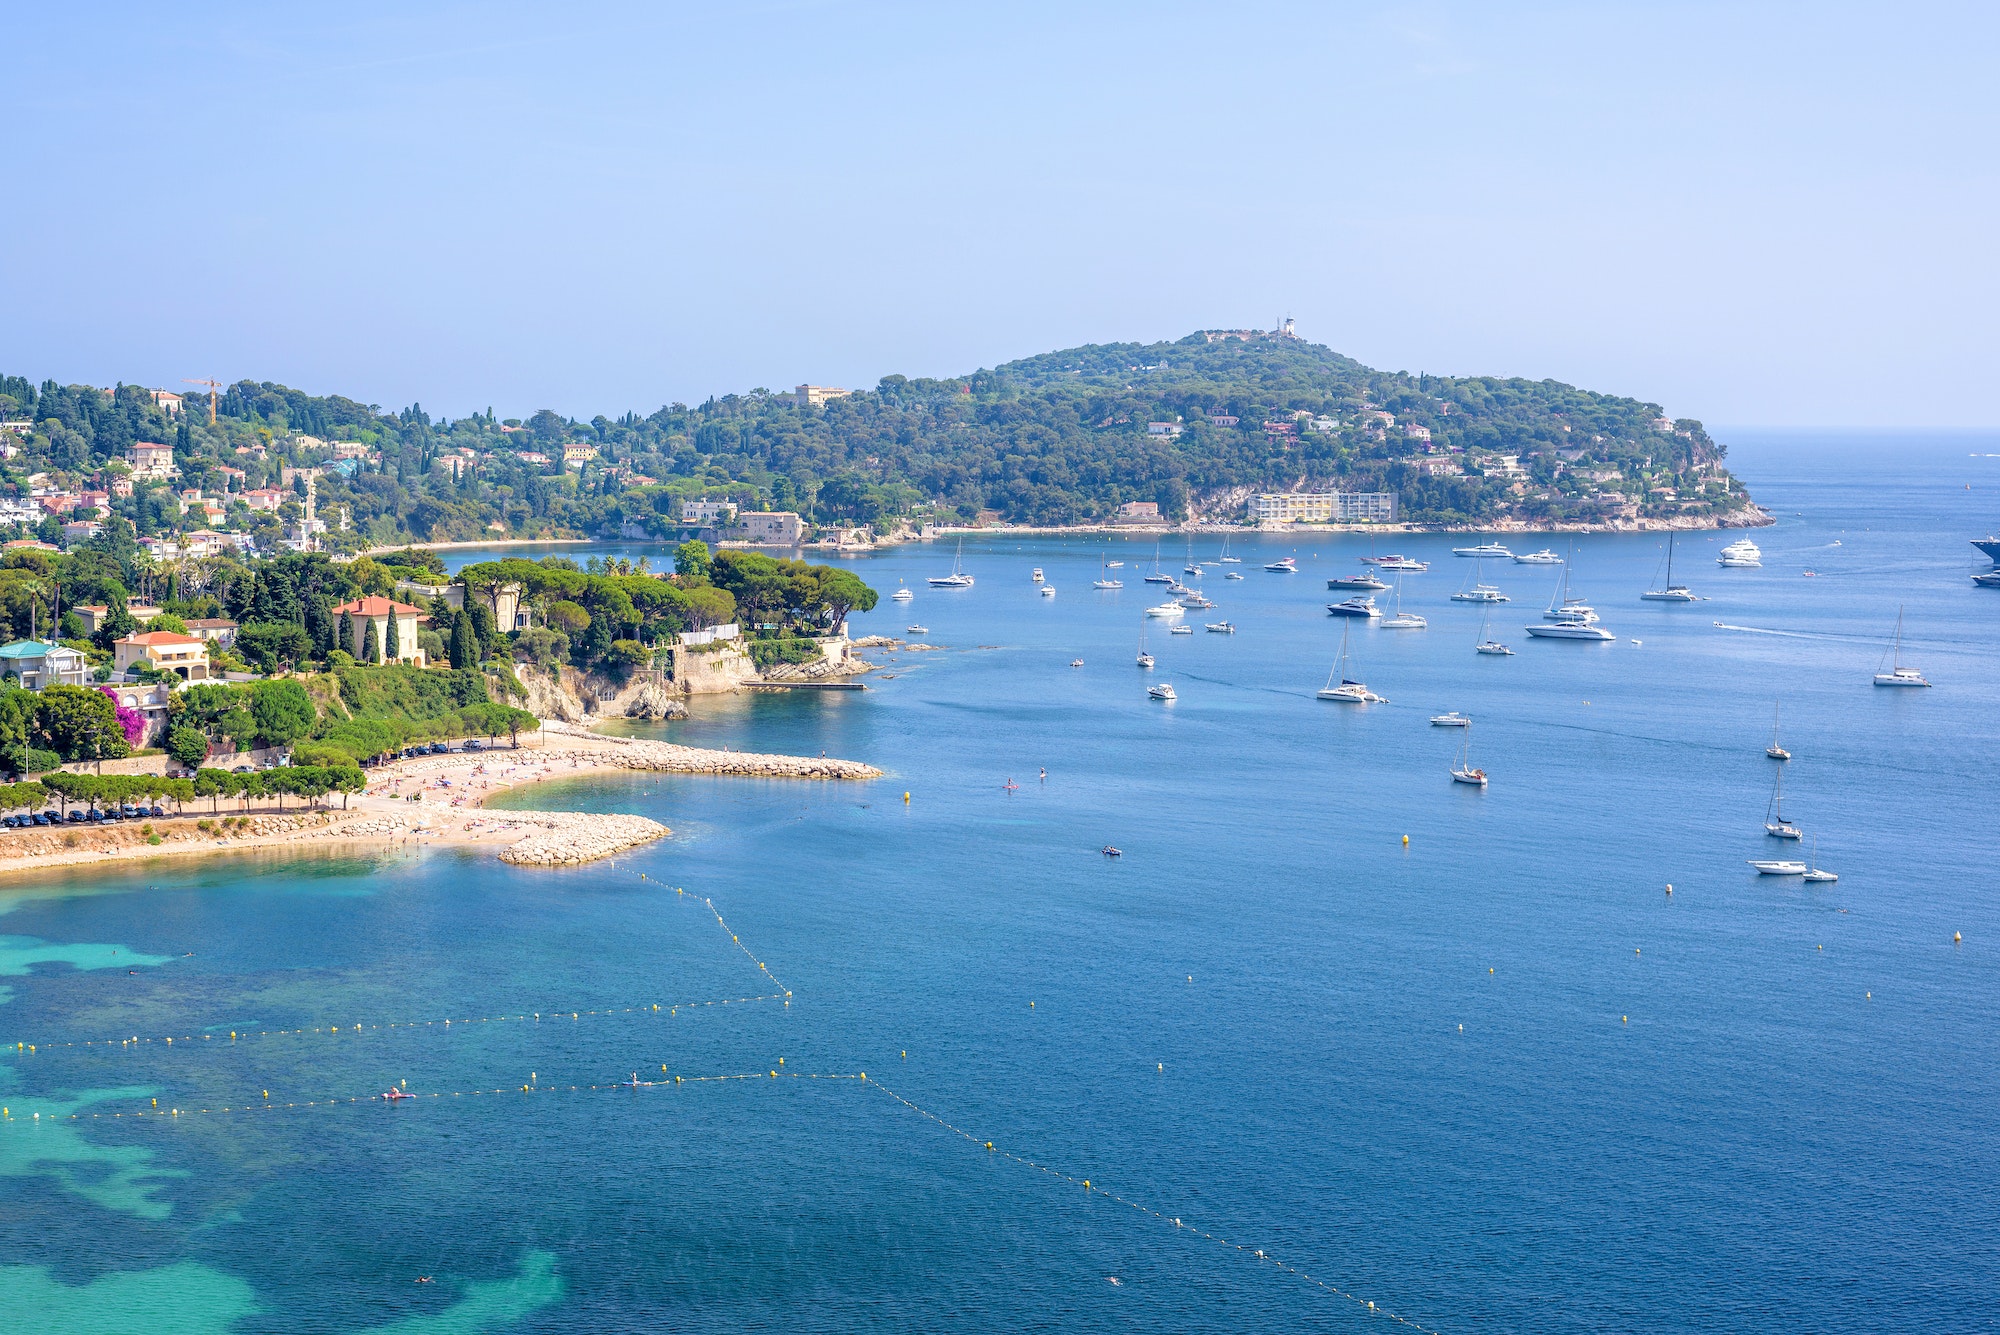 The architecture of Beaulieu-sur-Mer: an asset for property investment